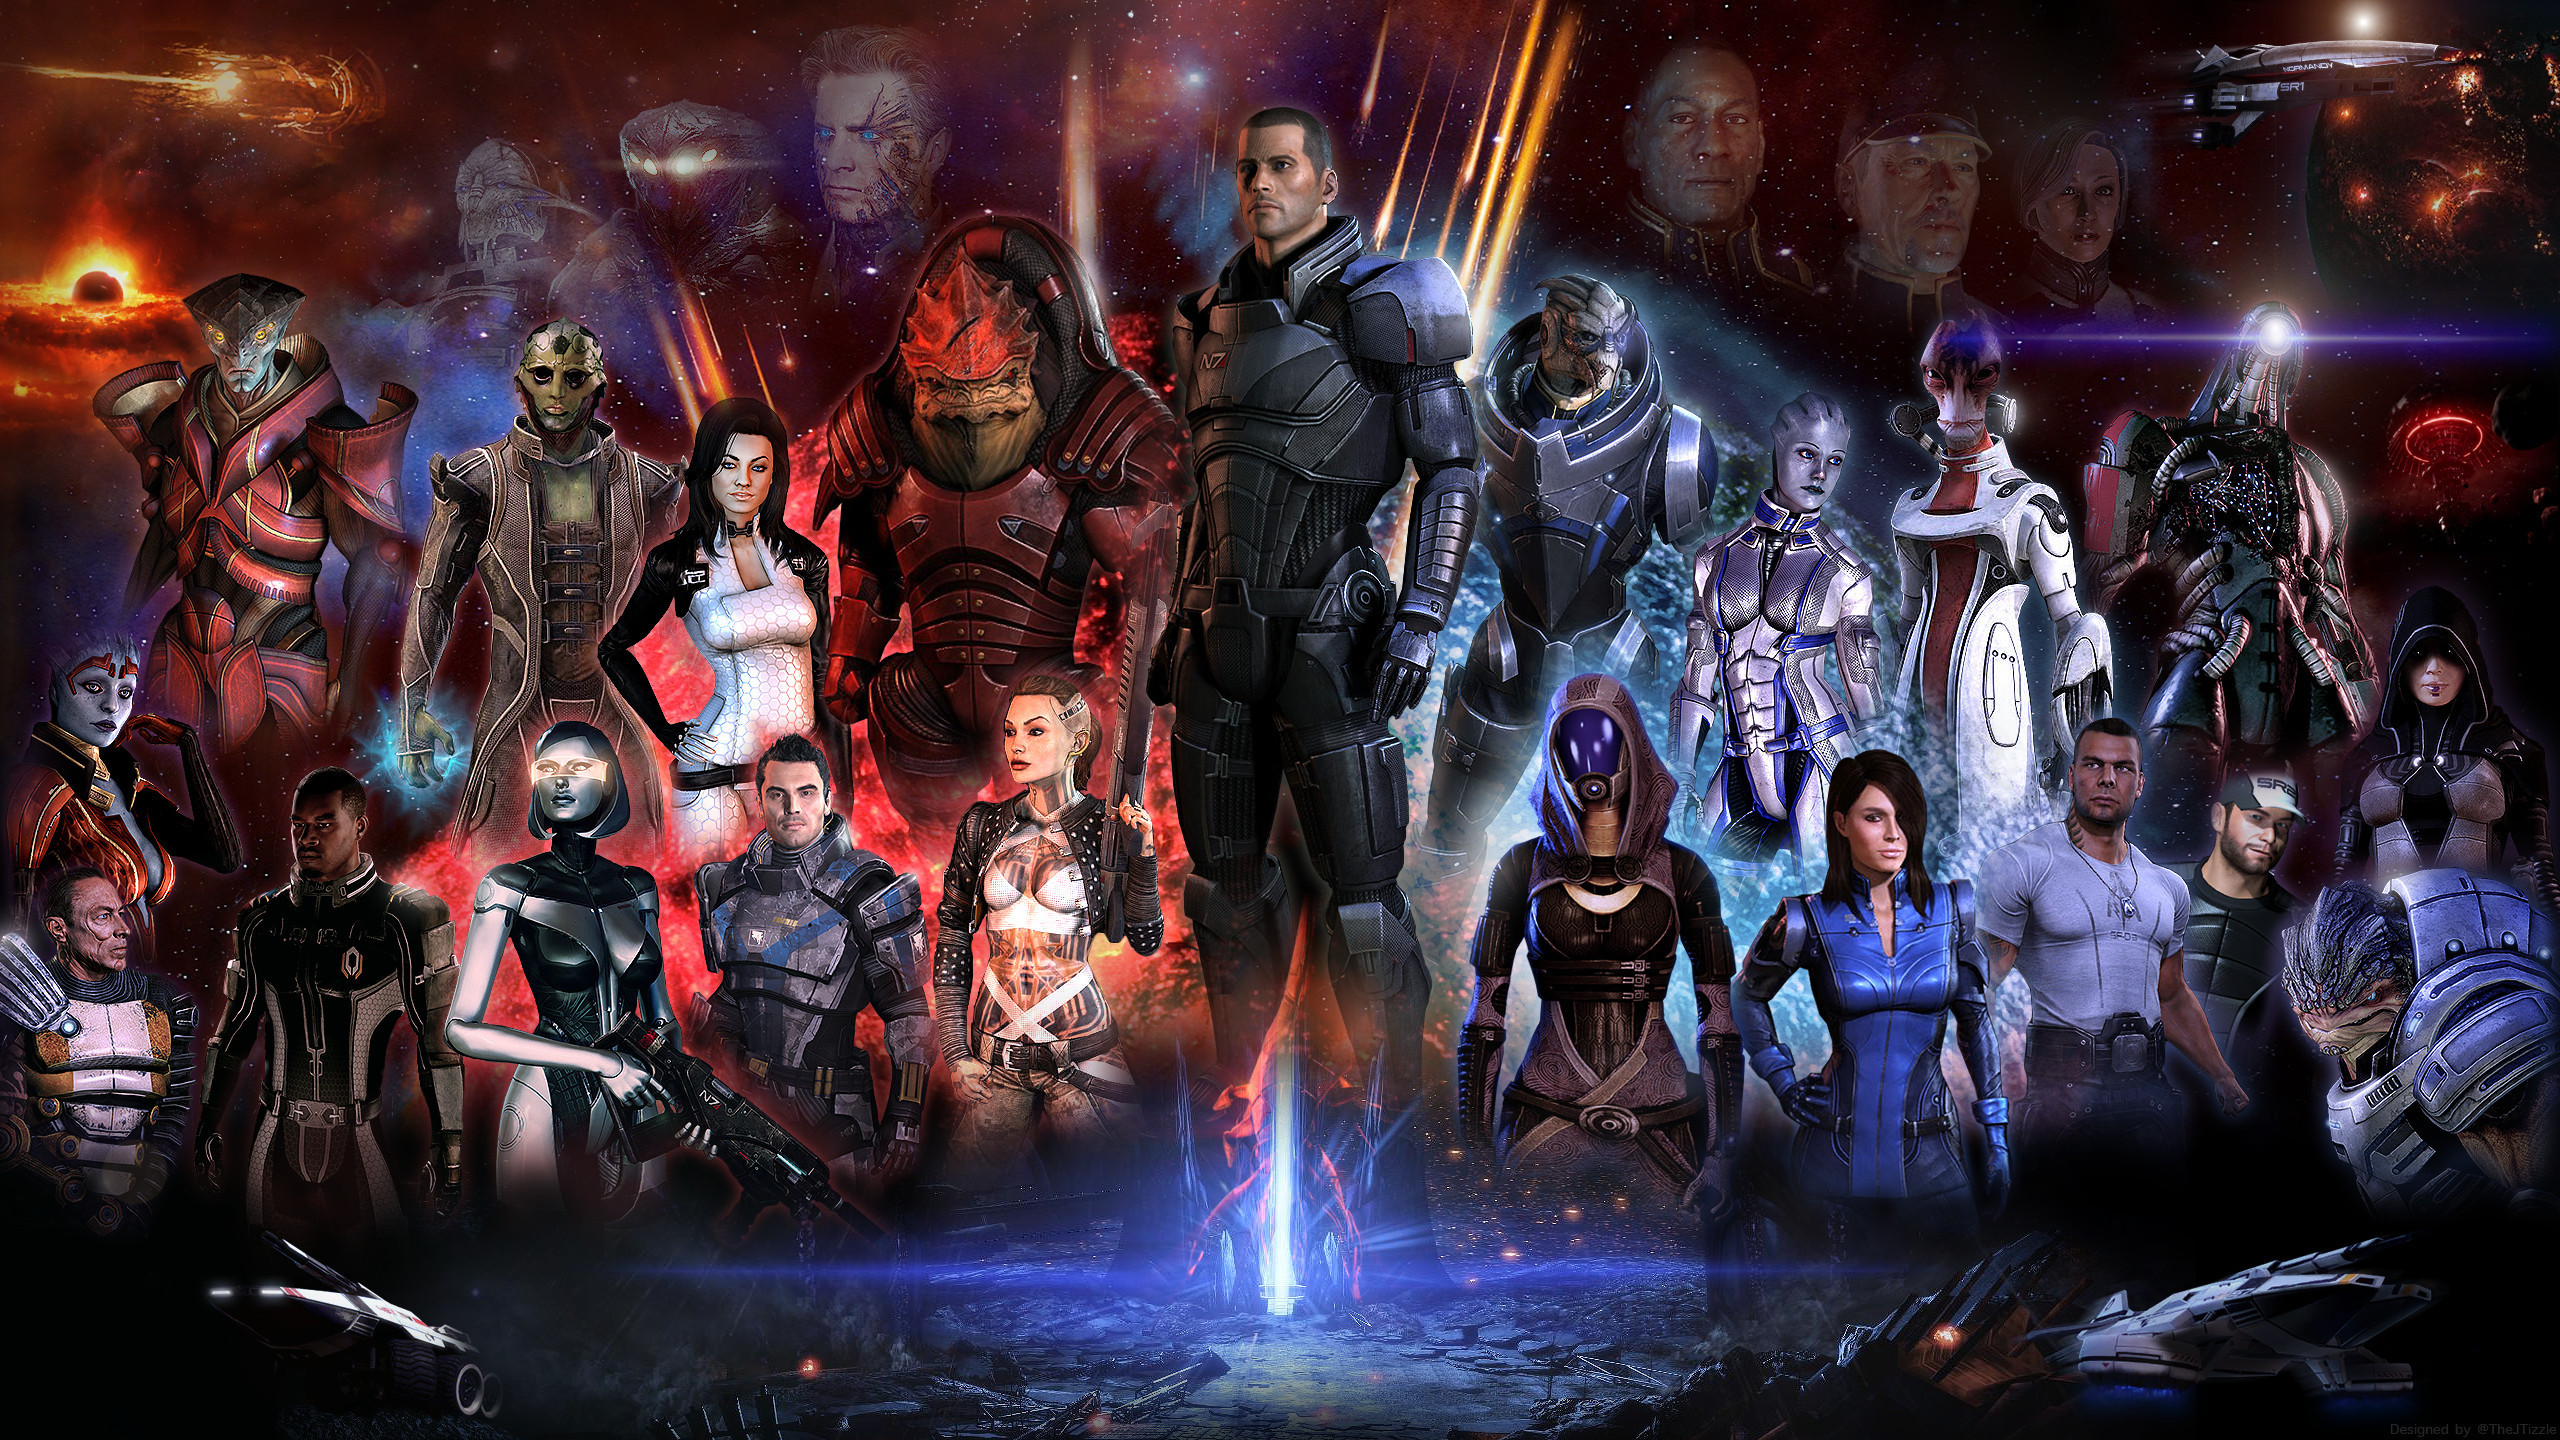 We all know that the Mass Effect trilogy is amazing but every game has its flaws. Mass Effect is a game built on choice. The goofs that happened based on ...